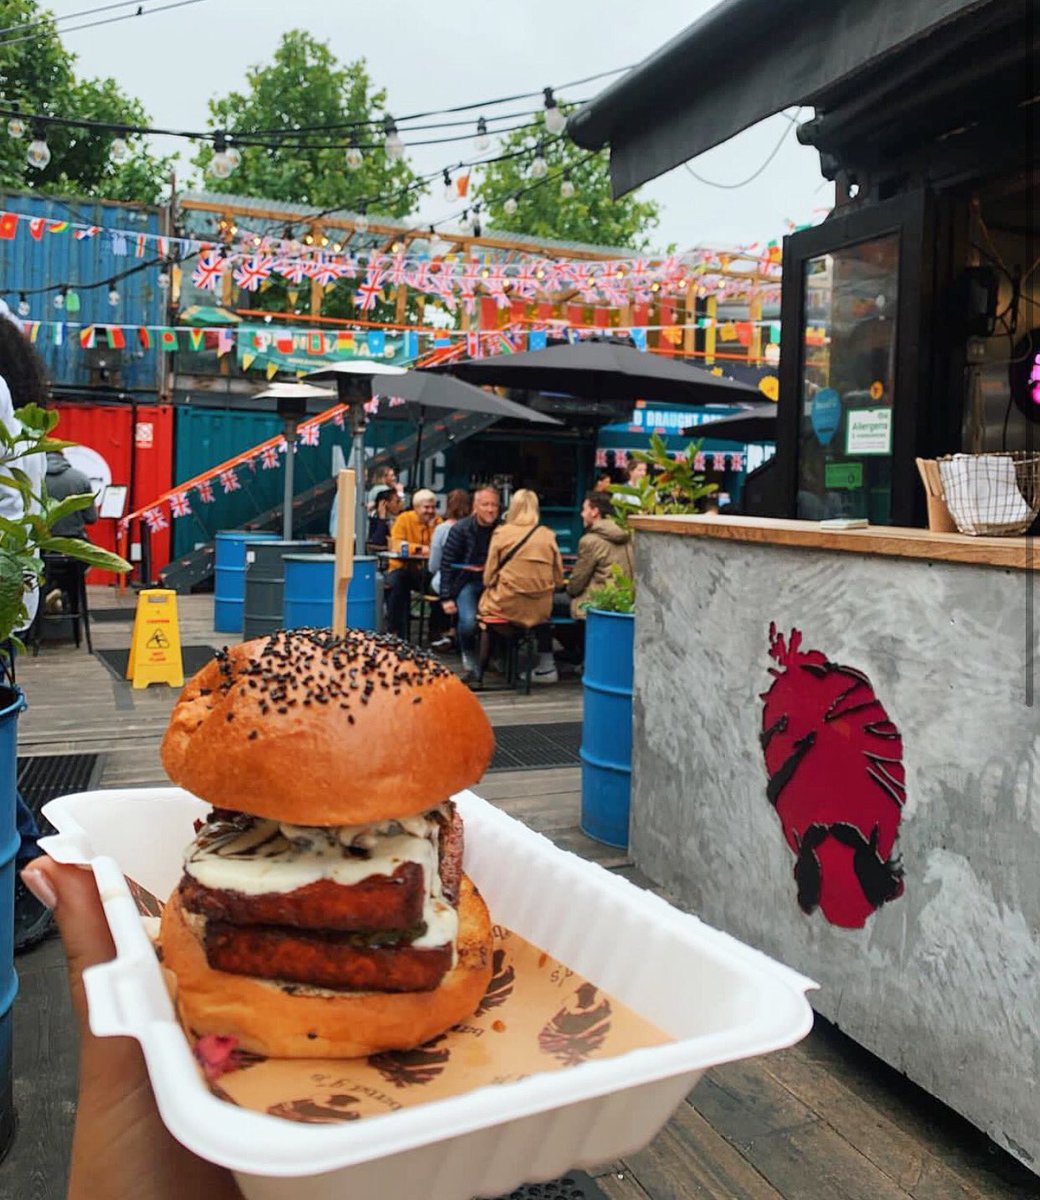 Banish the Monday blues with a trip to @popbrixton, where you can get your hands on a tasty burger that can be lamb or, if you’re having a #meatfreemonday, fried paneer cheese 😋 Now that’s how to start the week off right 👌🏾